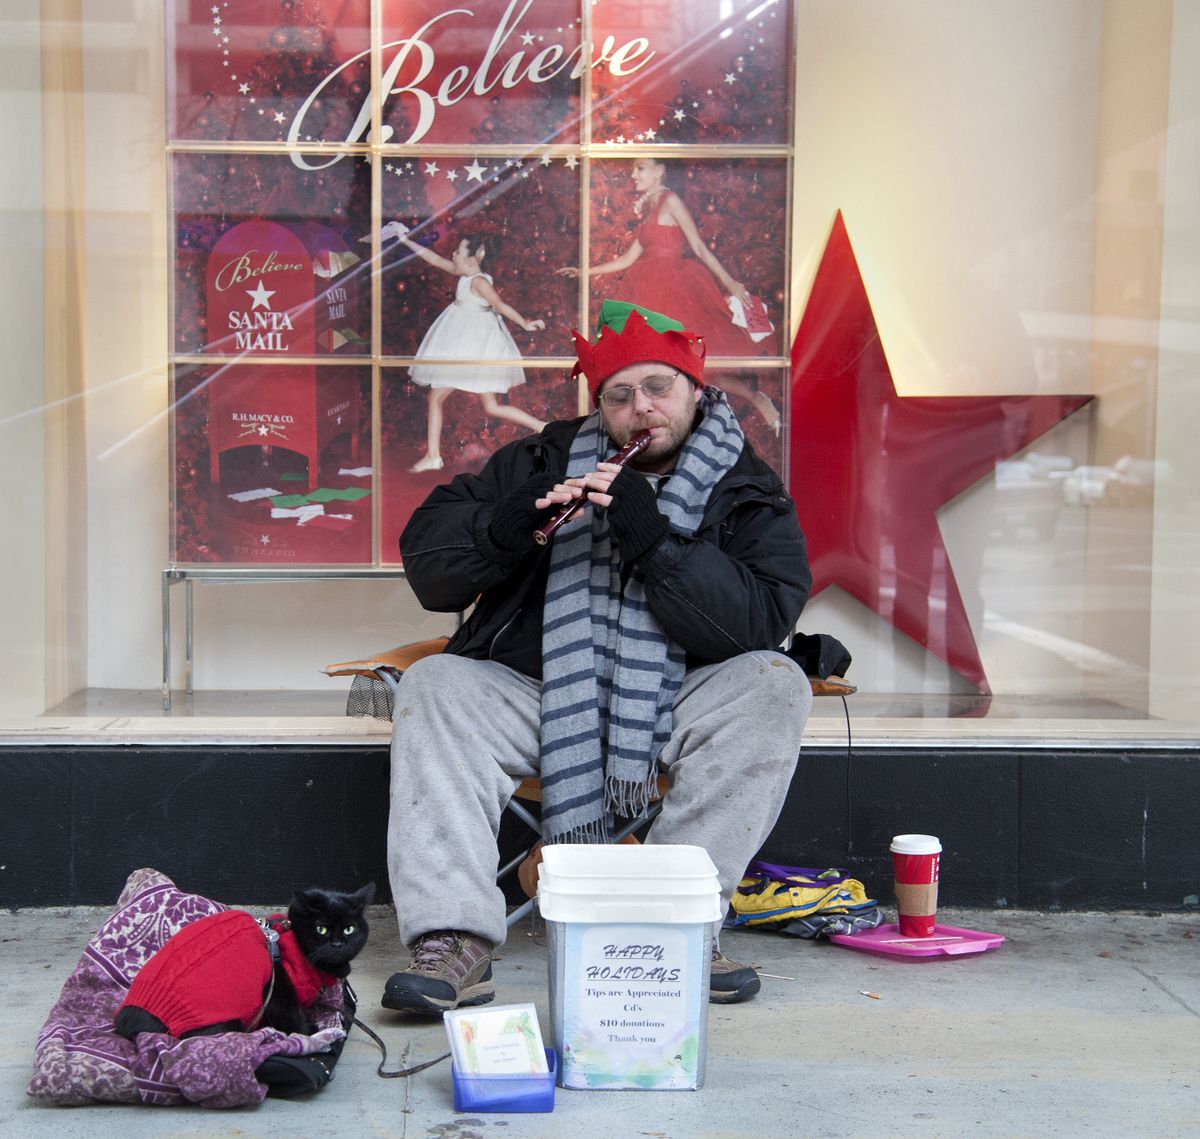 With his cat Muffen by his side, Talan Wilhelm plays Christmas music on his recorder Tuesday at Main Avenue and Howard Street. (Dan Pelle)